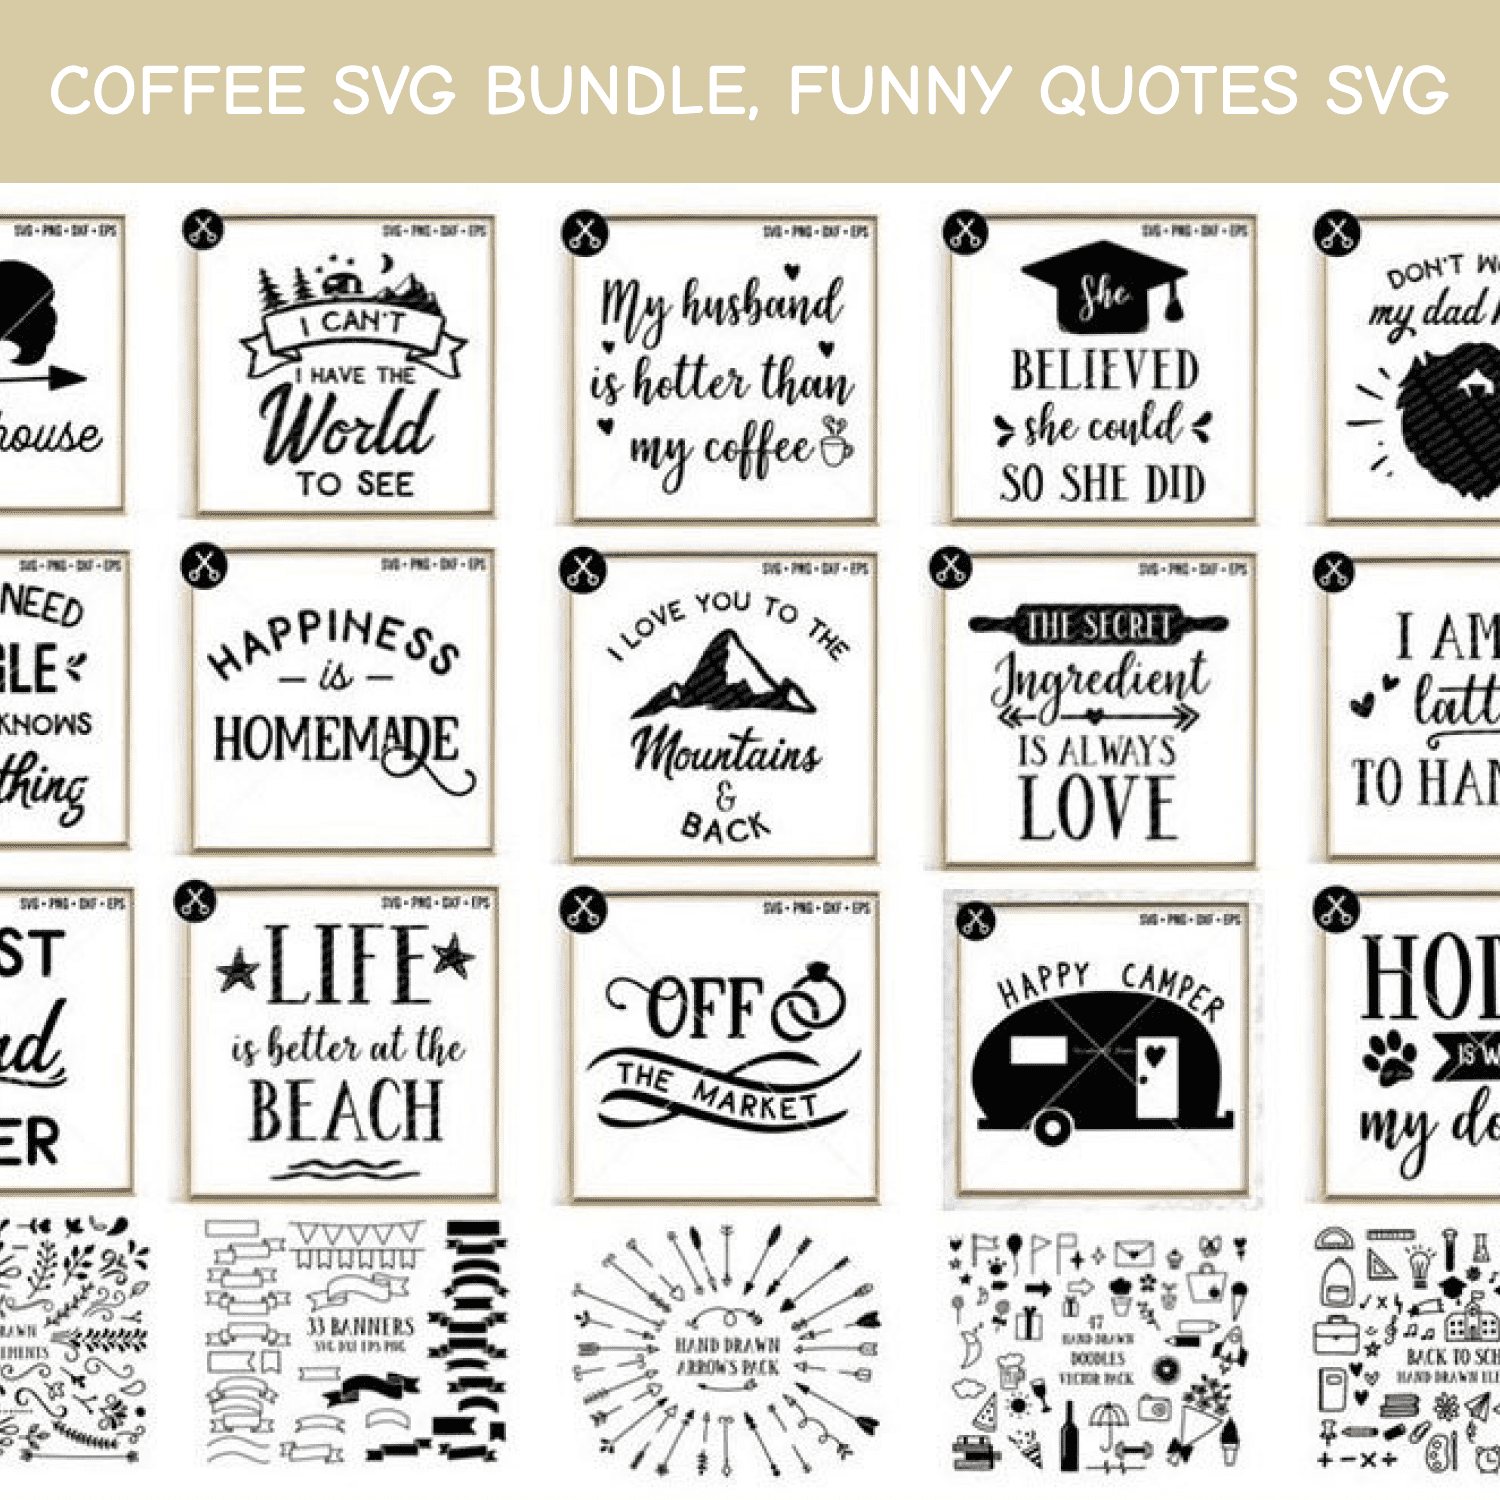 Coffee SVG Bundle, funny quotes svg cover.